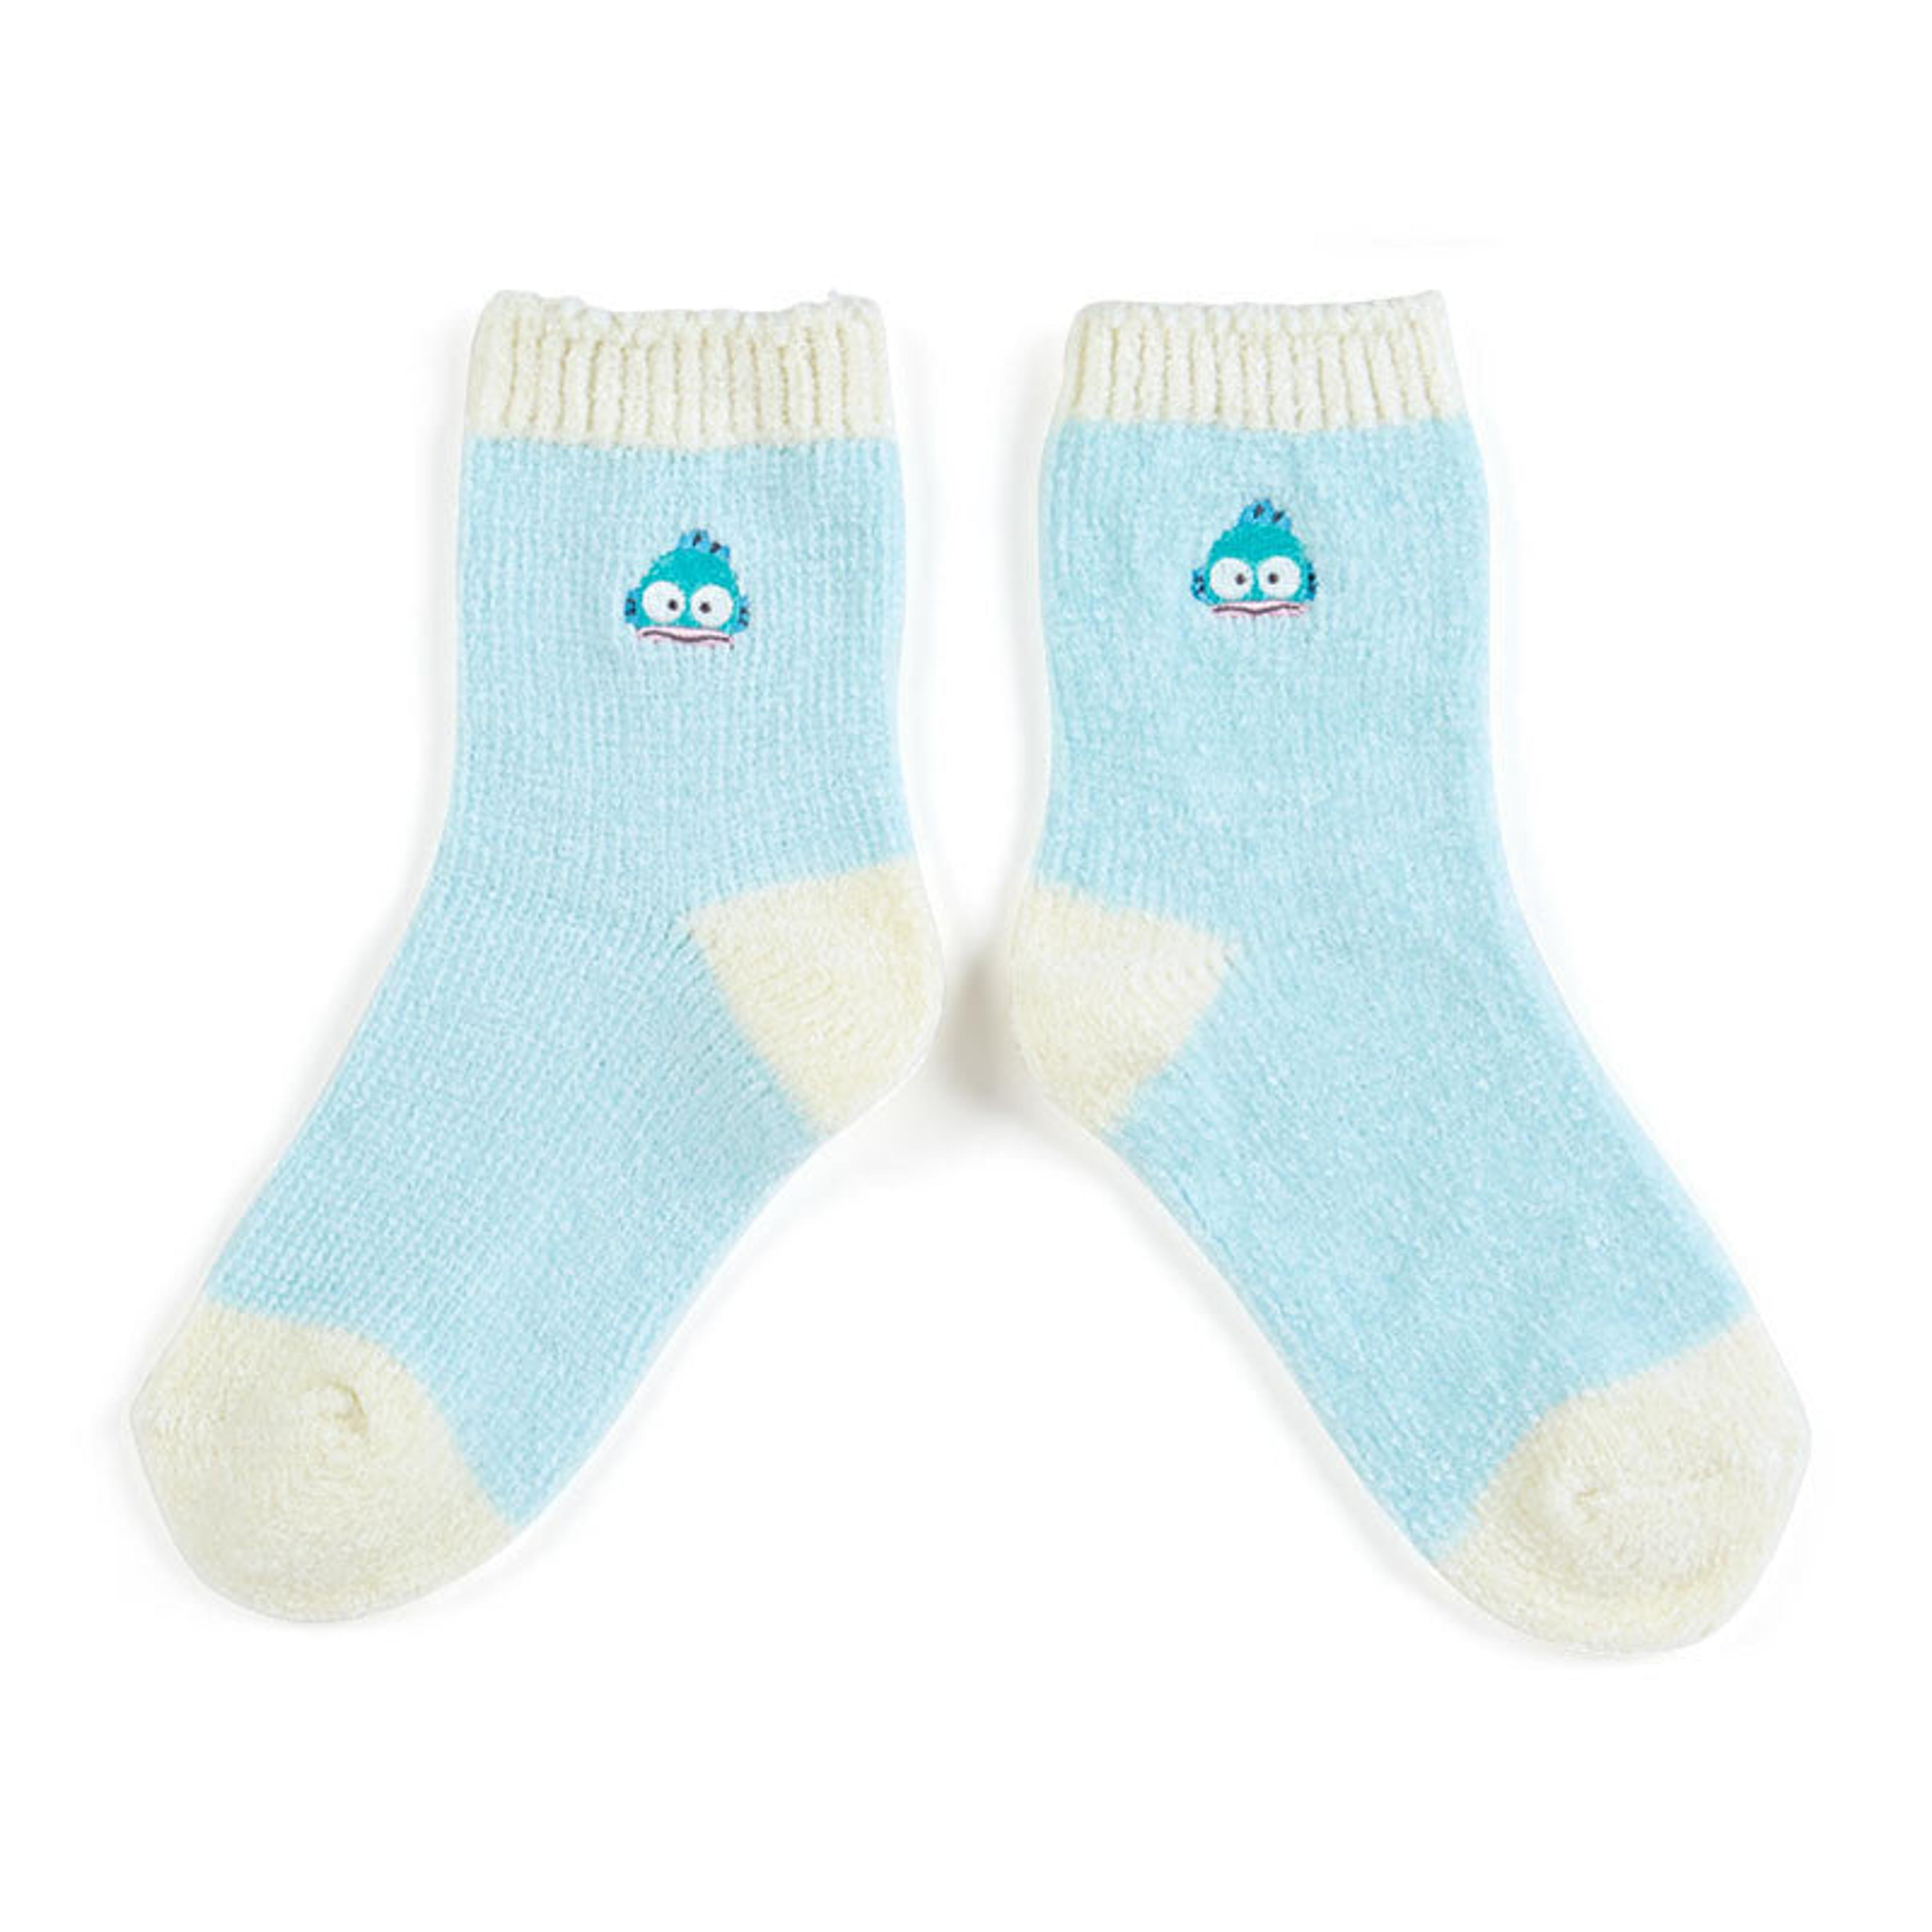 Alternate View 7 of Sanrio Characters Embroidered Chenille Adult Socks